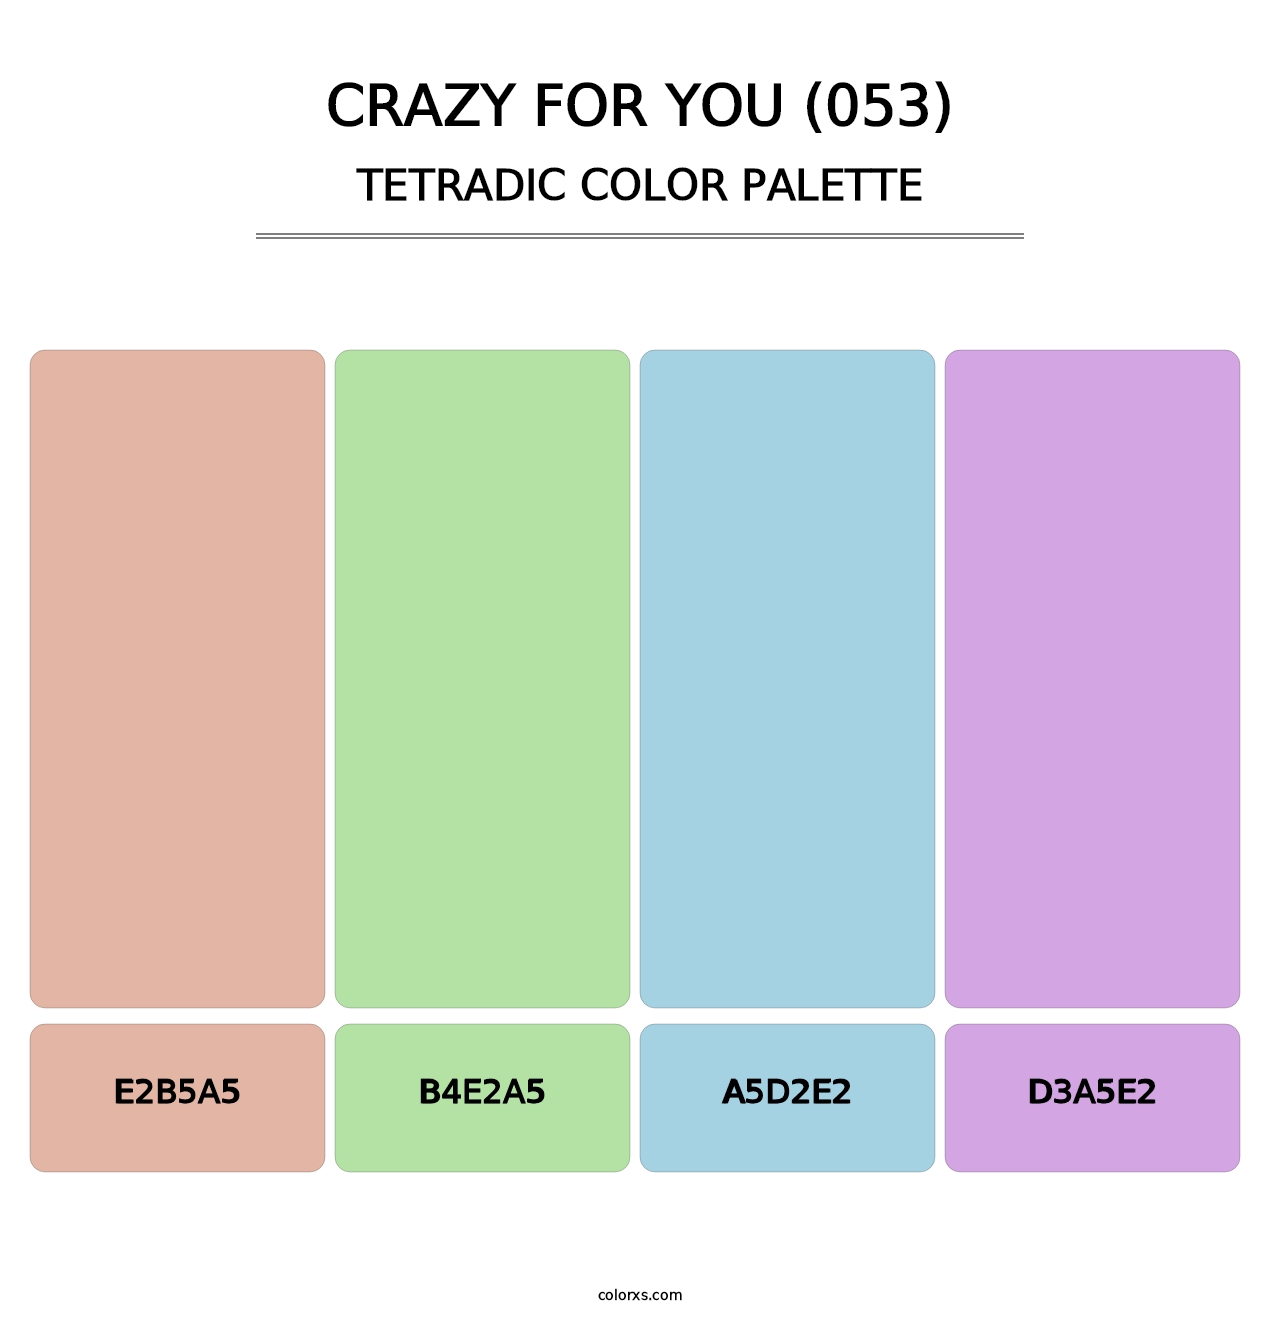 Crazy For You (053) - Tetradic Color Palette